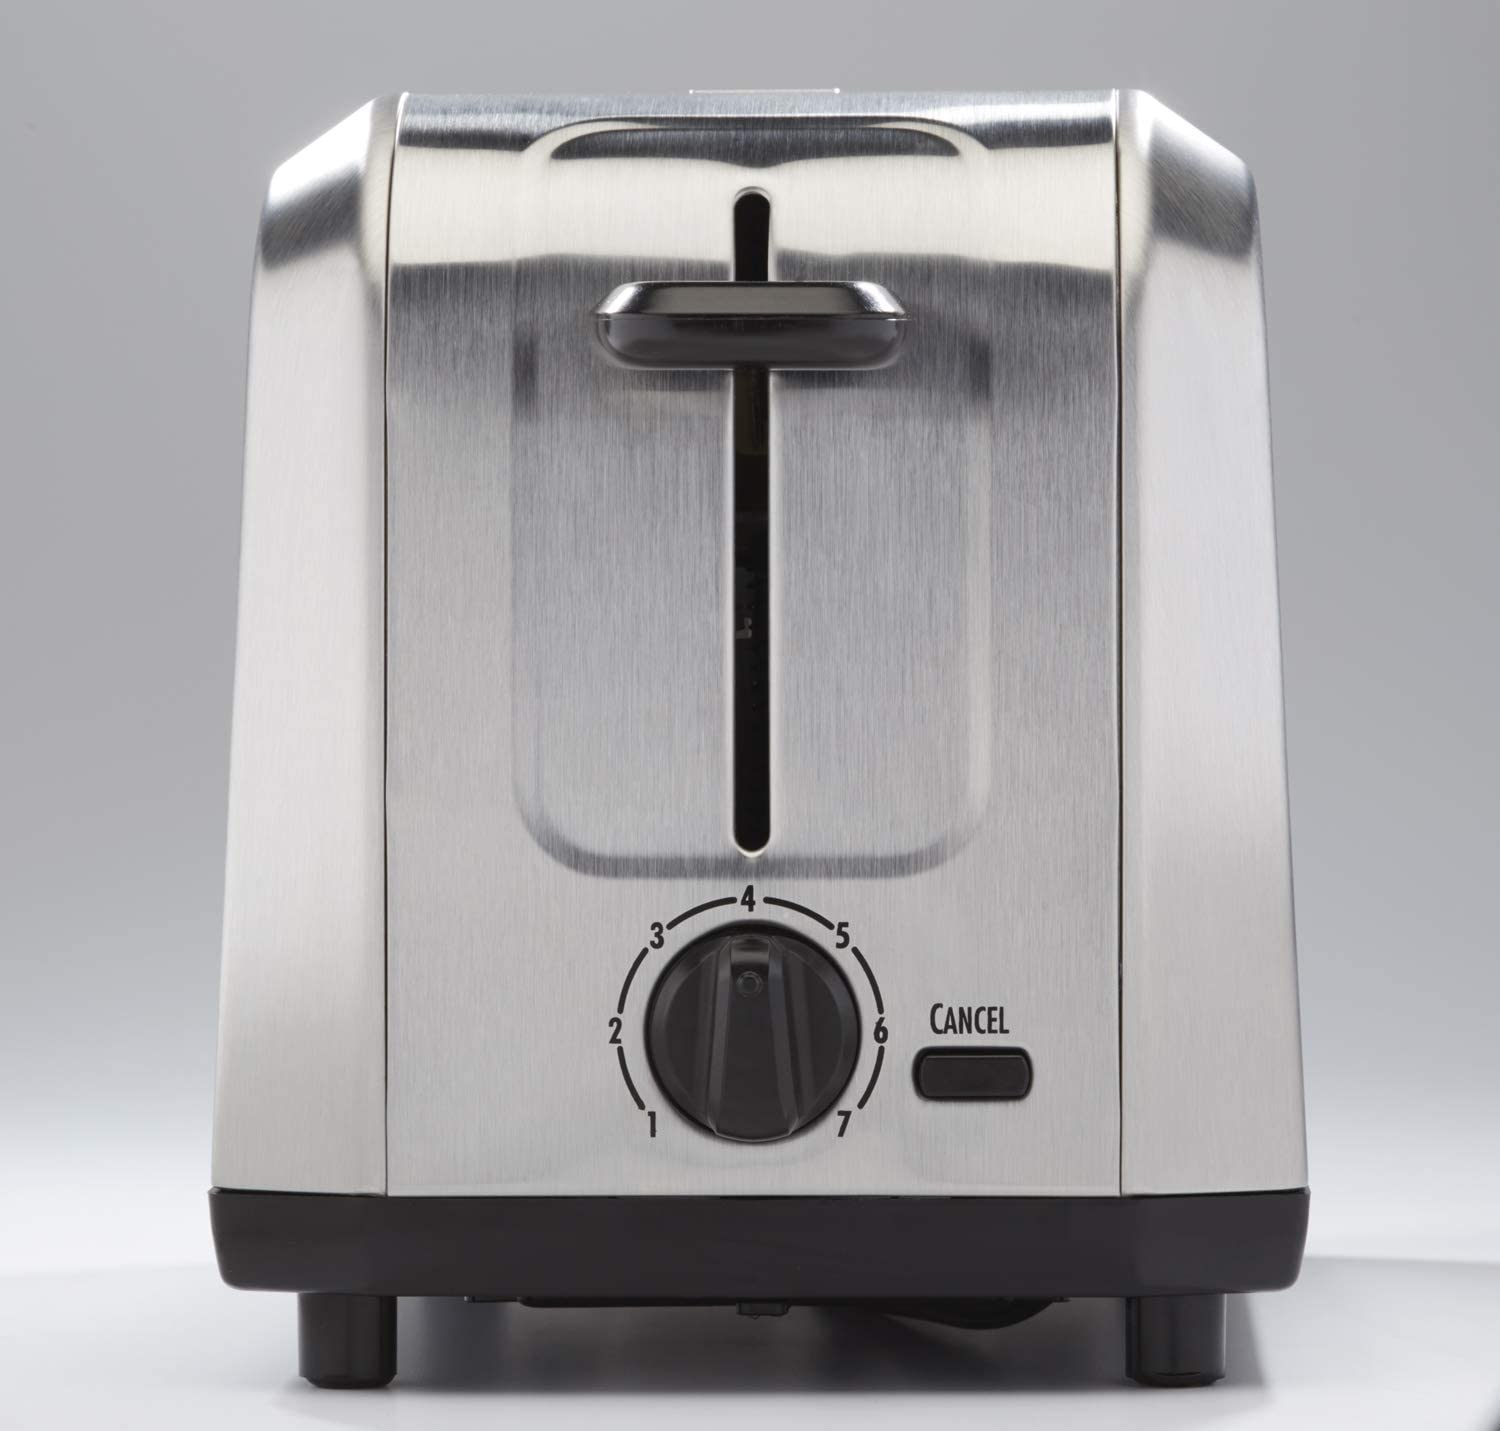 Hamilton Beach Brushed Stainless Steel Toaster | Model# 22910 Hamilton Beach Brushed Stainless Steel Toaster Model 22910